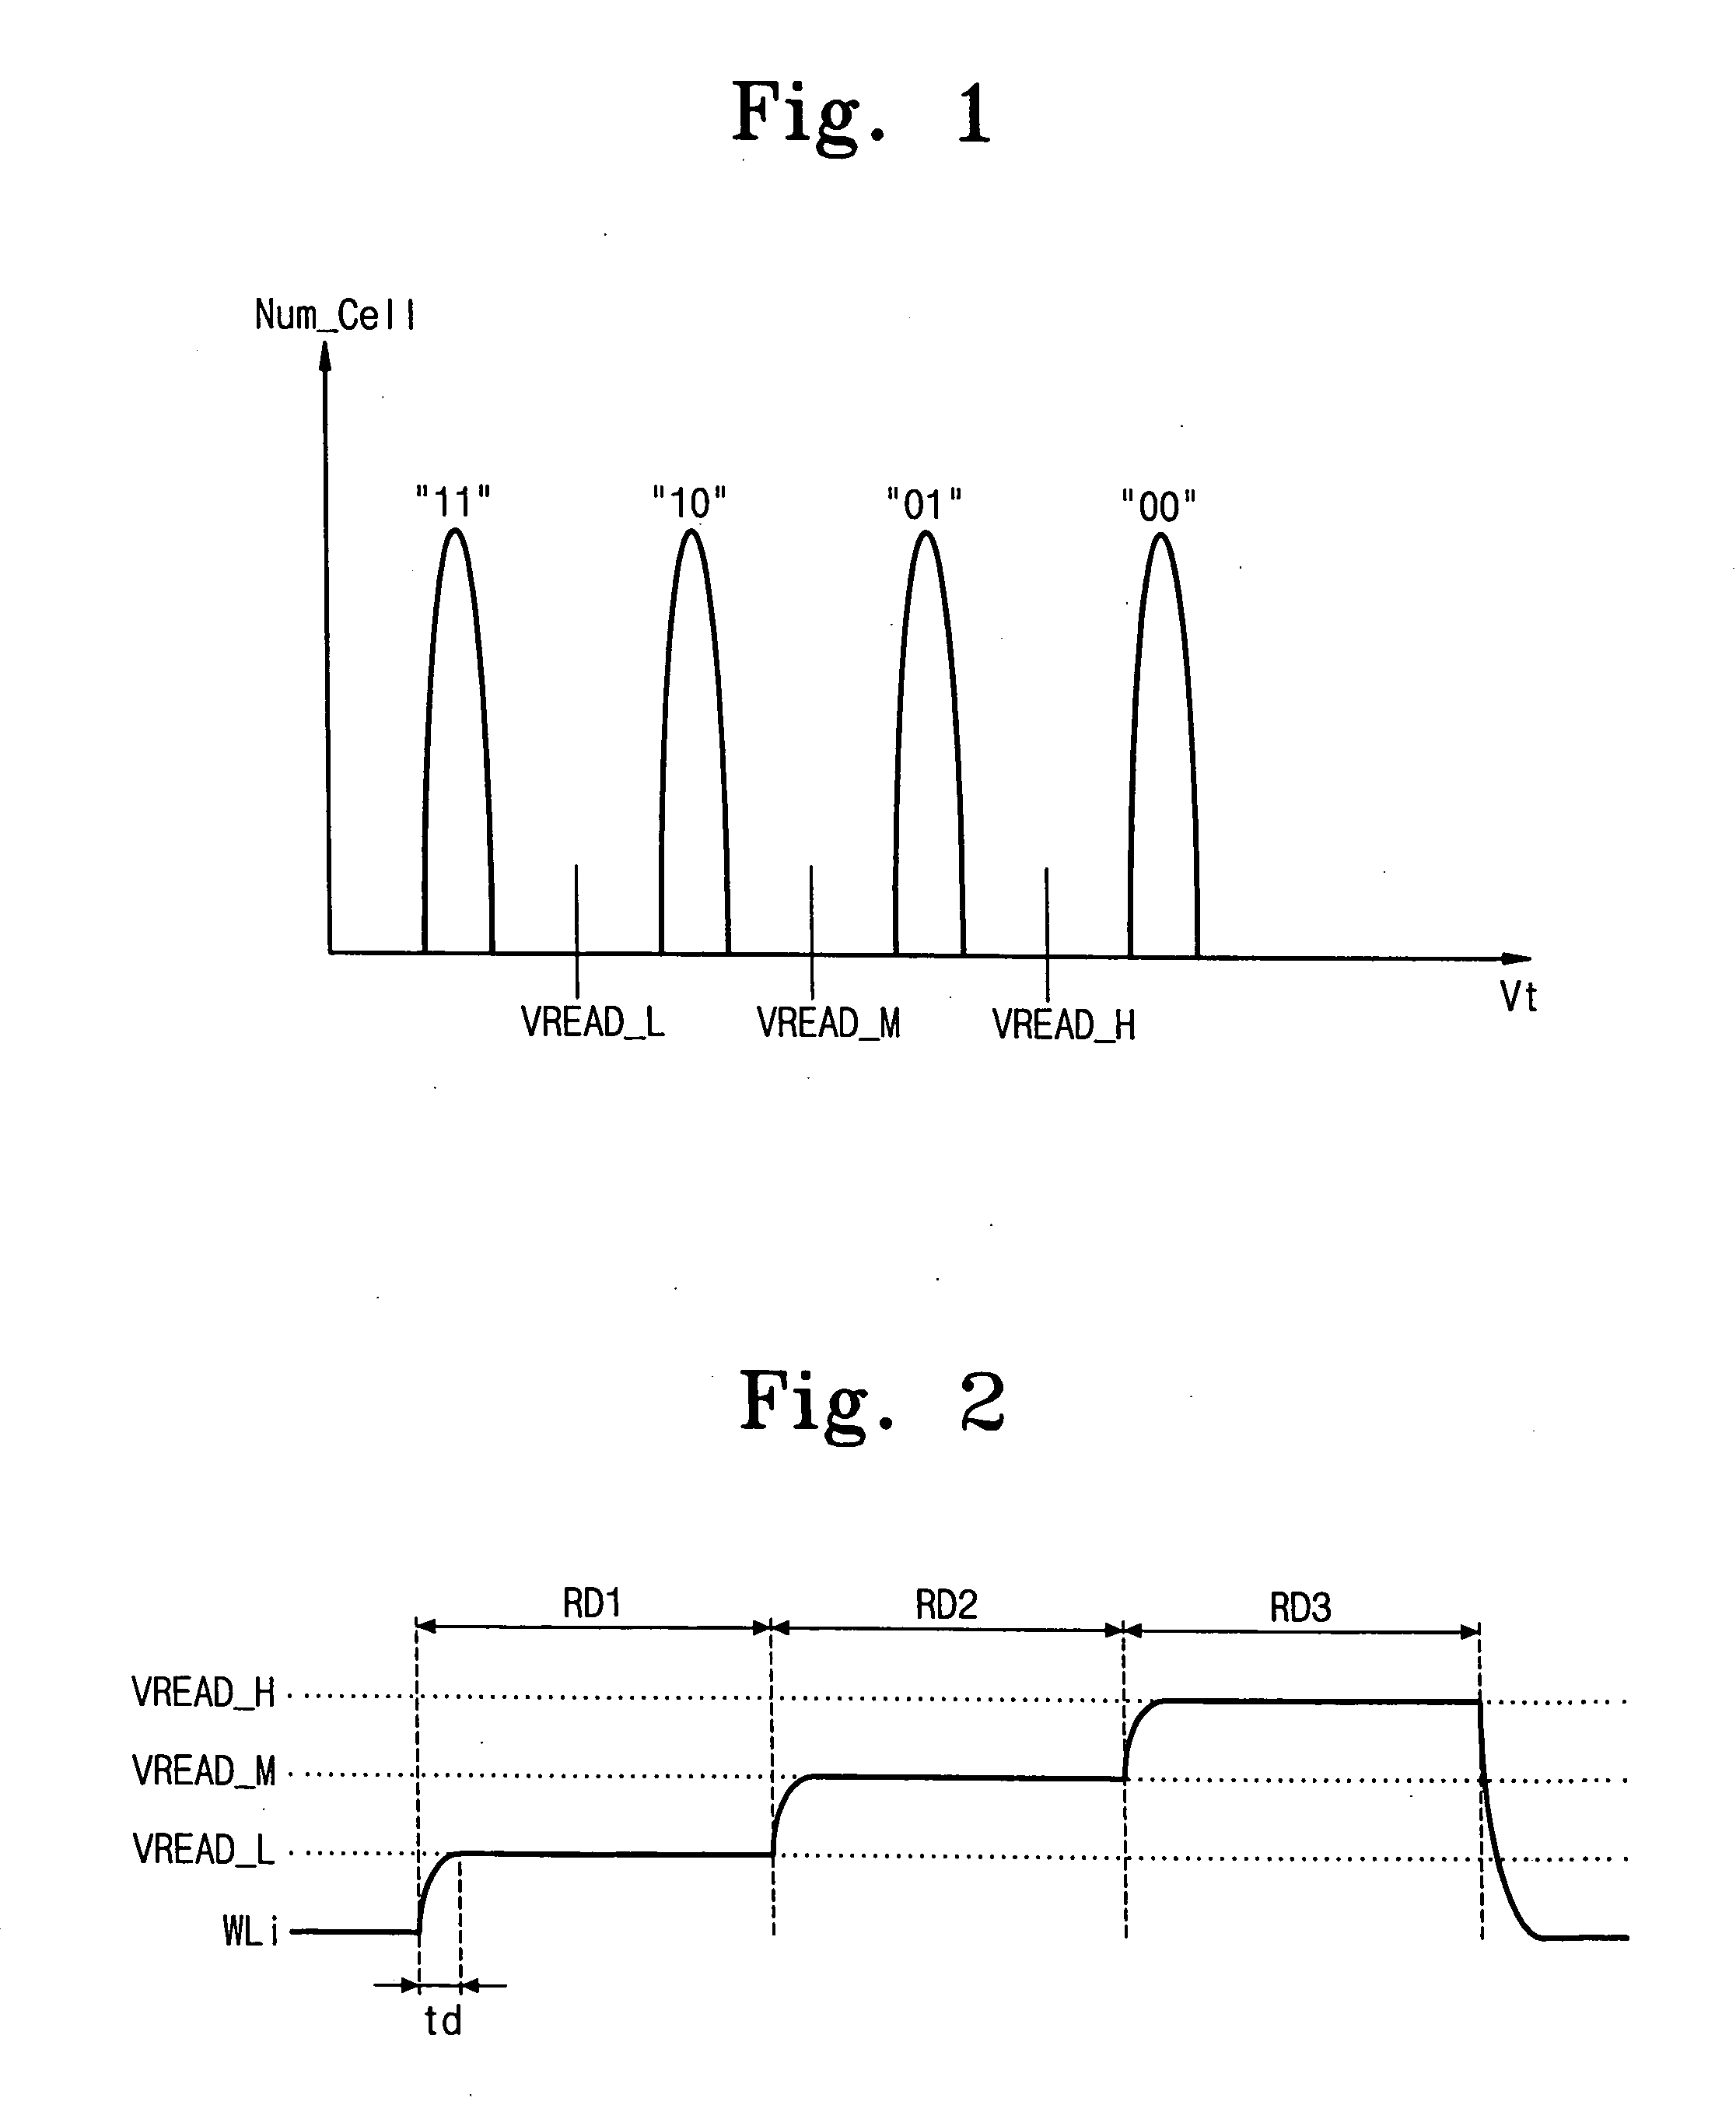 Flash memory device with improved read speed